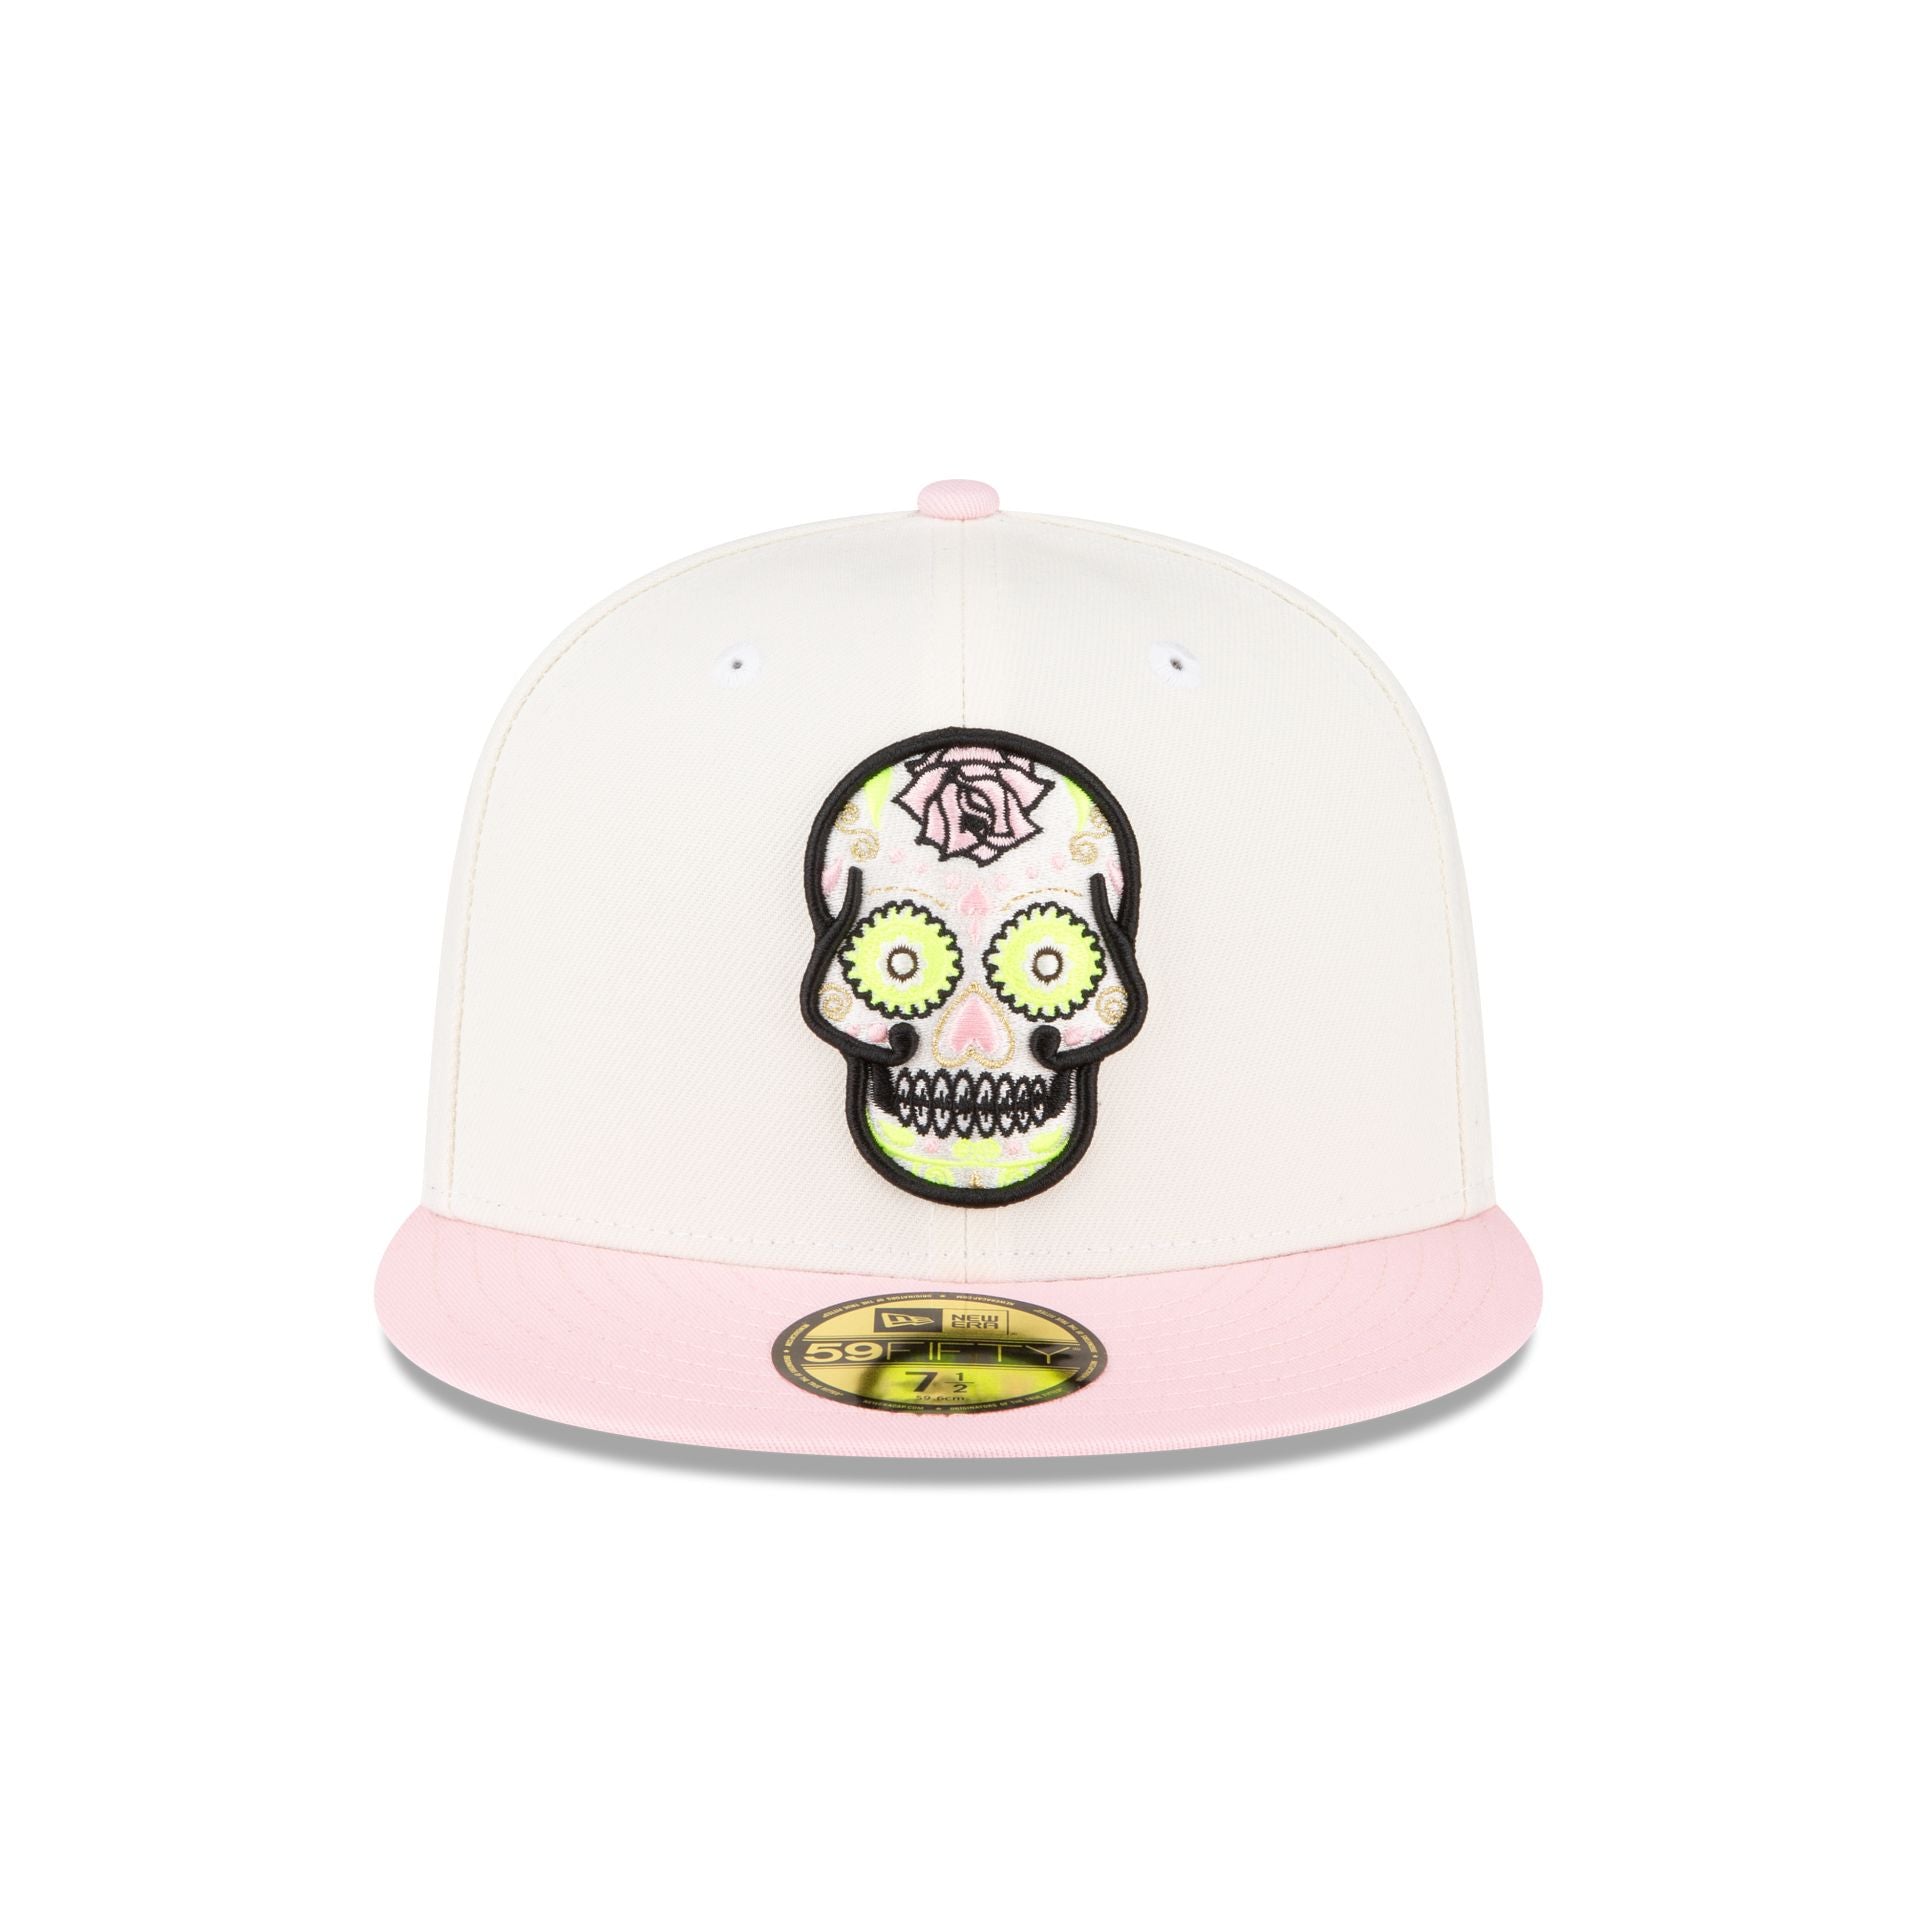 Day of The Dead Pink Sugar Skull 59FIFTY Fitted Hat, White - Size: 7, by New Era